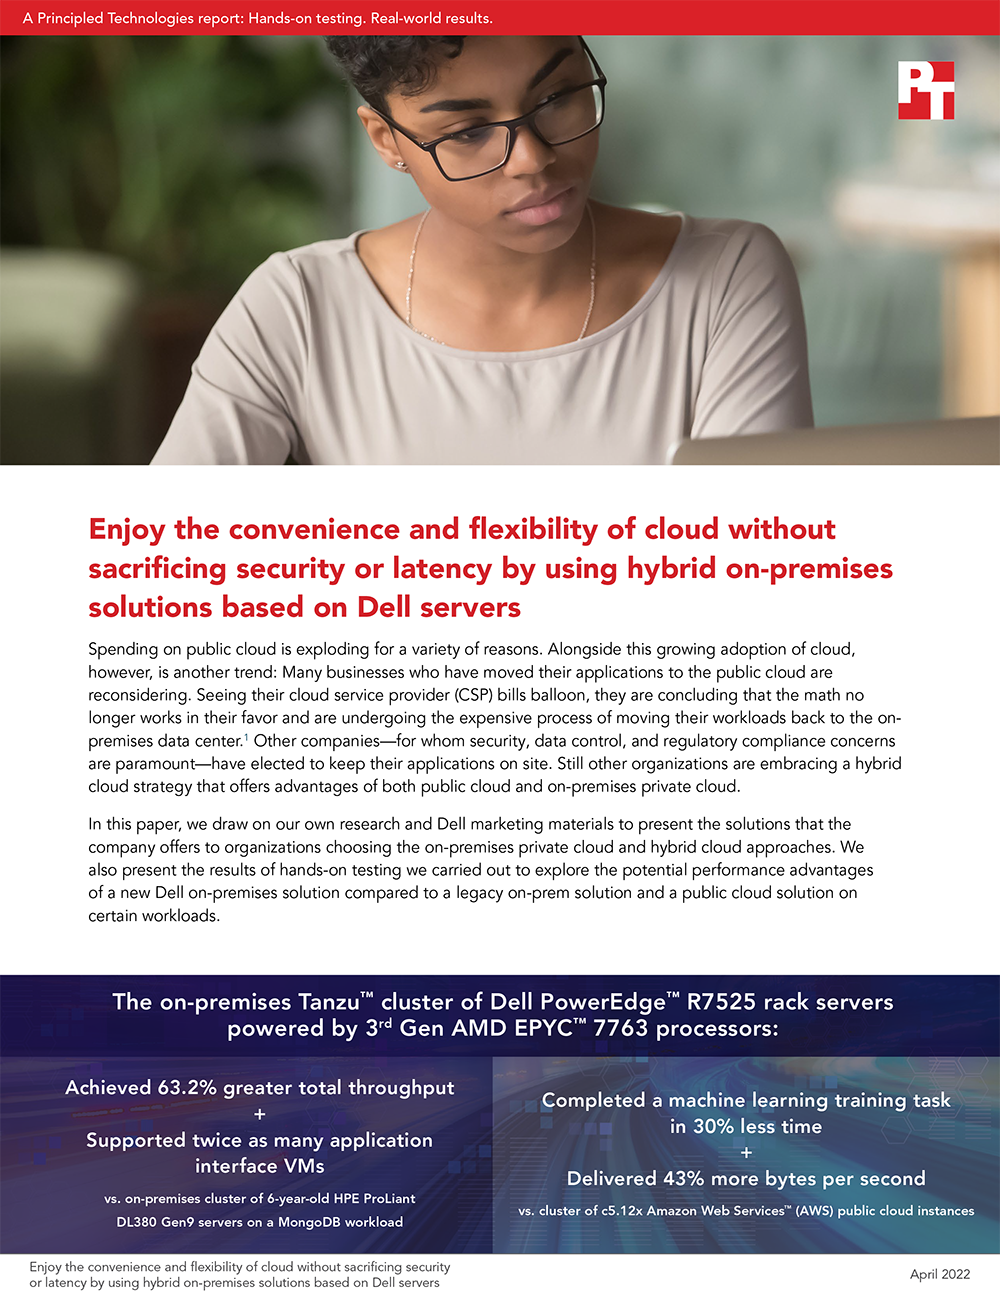  Enjoy the convenience and flexibility of cloud without sacrificing security or latency by using hybrid on-premises solutions based on Dell servers